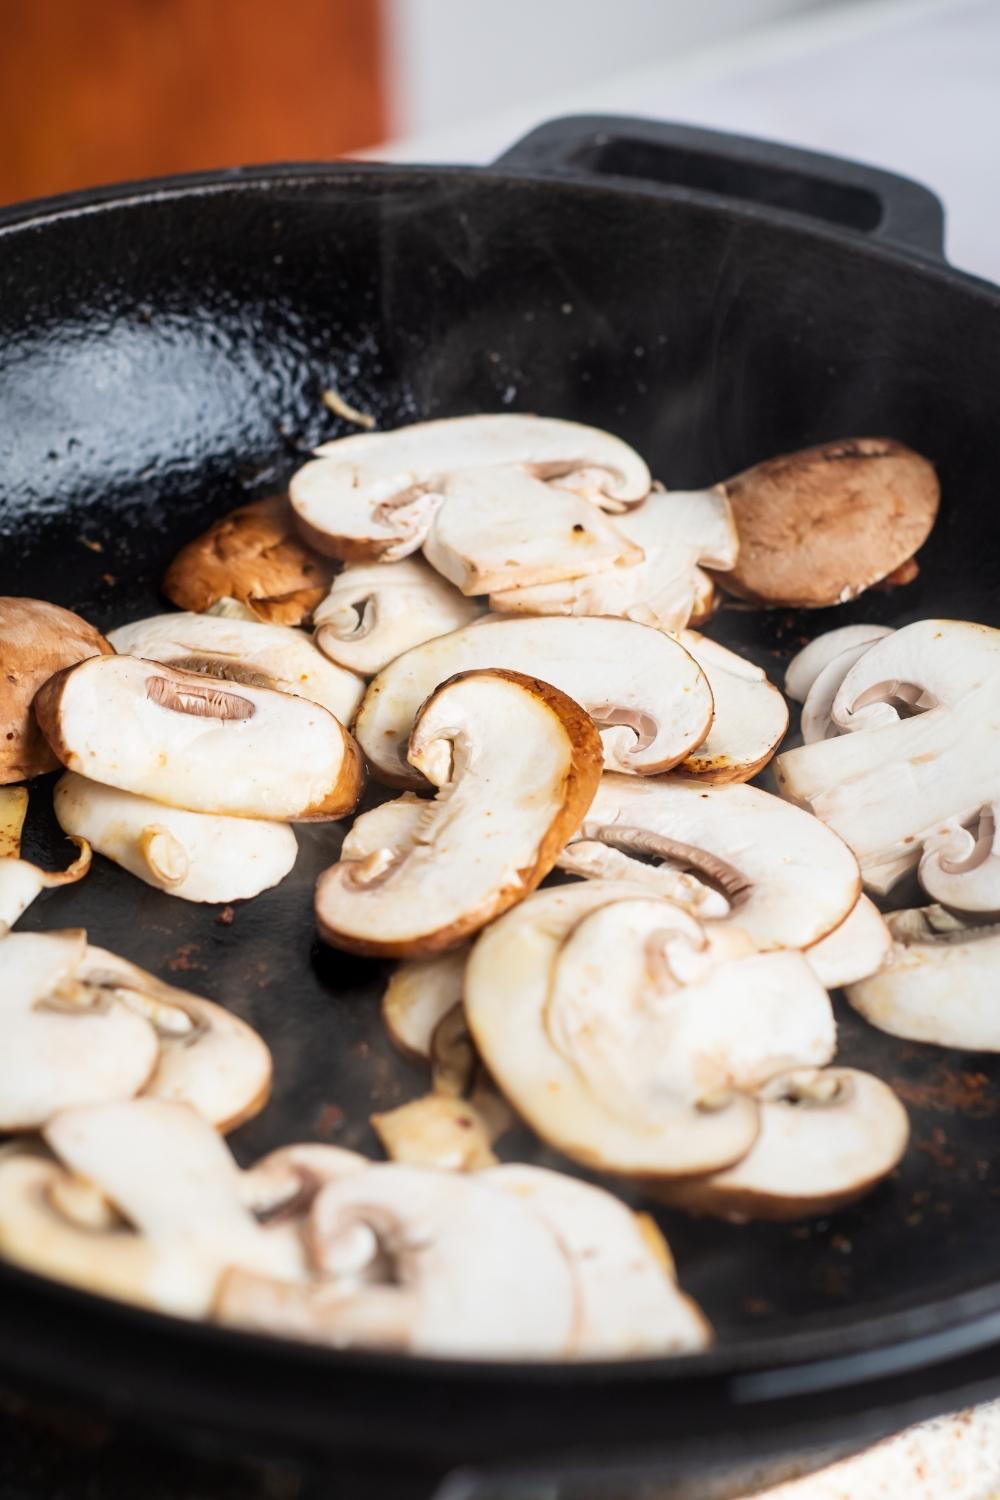 A skillet with uncooked mushrooms.